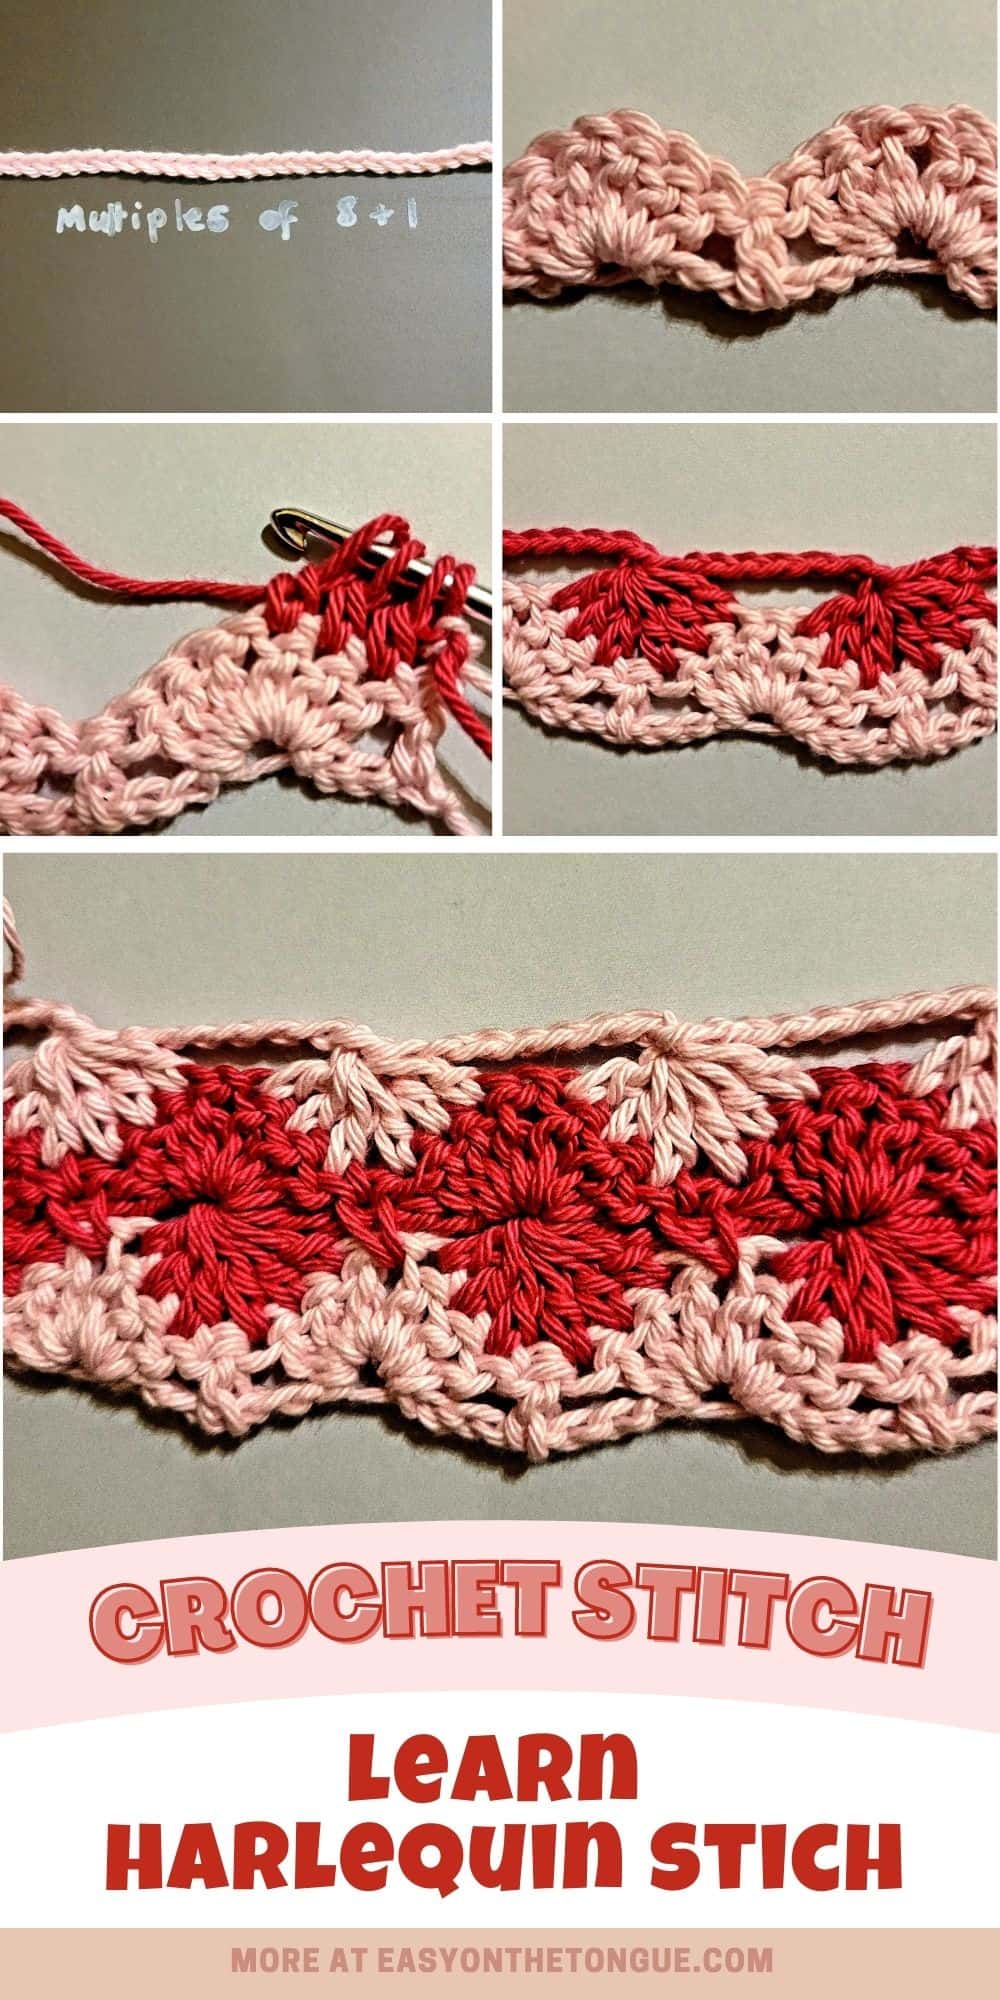 Crochet Harlequin Stitch photo tutorial by easyonthetongue.com  learn to crochet harlequin stitch anD ideas to use it